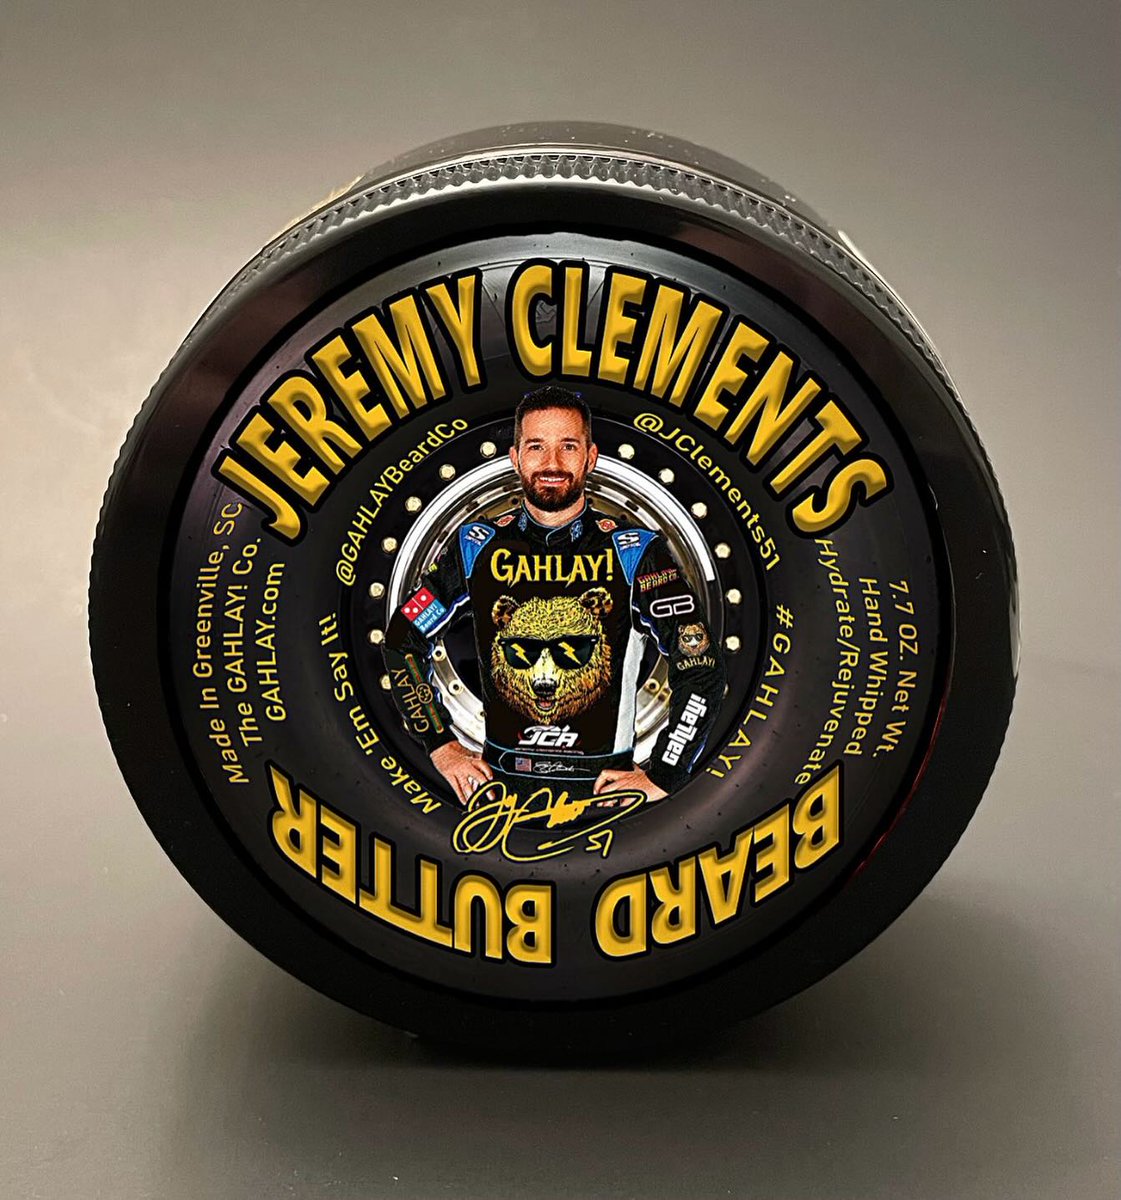 Check it out!! @JClements51 & @GahlayBeardCo team up again with the new drop of the Jeremy Clements 500 Super Rich Beard Butter! #MakeEmSayIt #Gahlay! Details 👇 jeremyclements51.com/uncategorized/… Visit GAHLAY.com to make your purchase today. @NASCAR_Xfinity @XfinityRacing